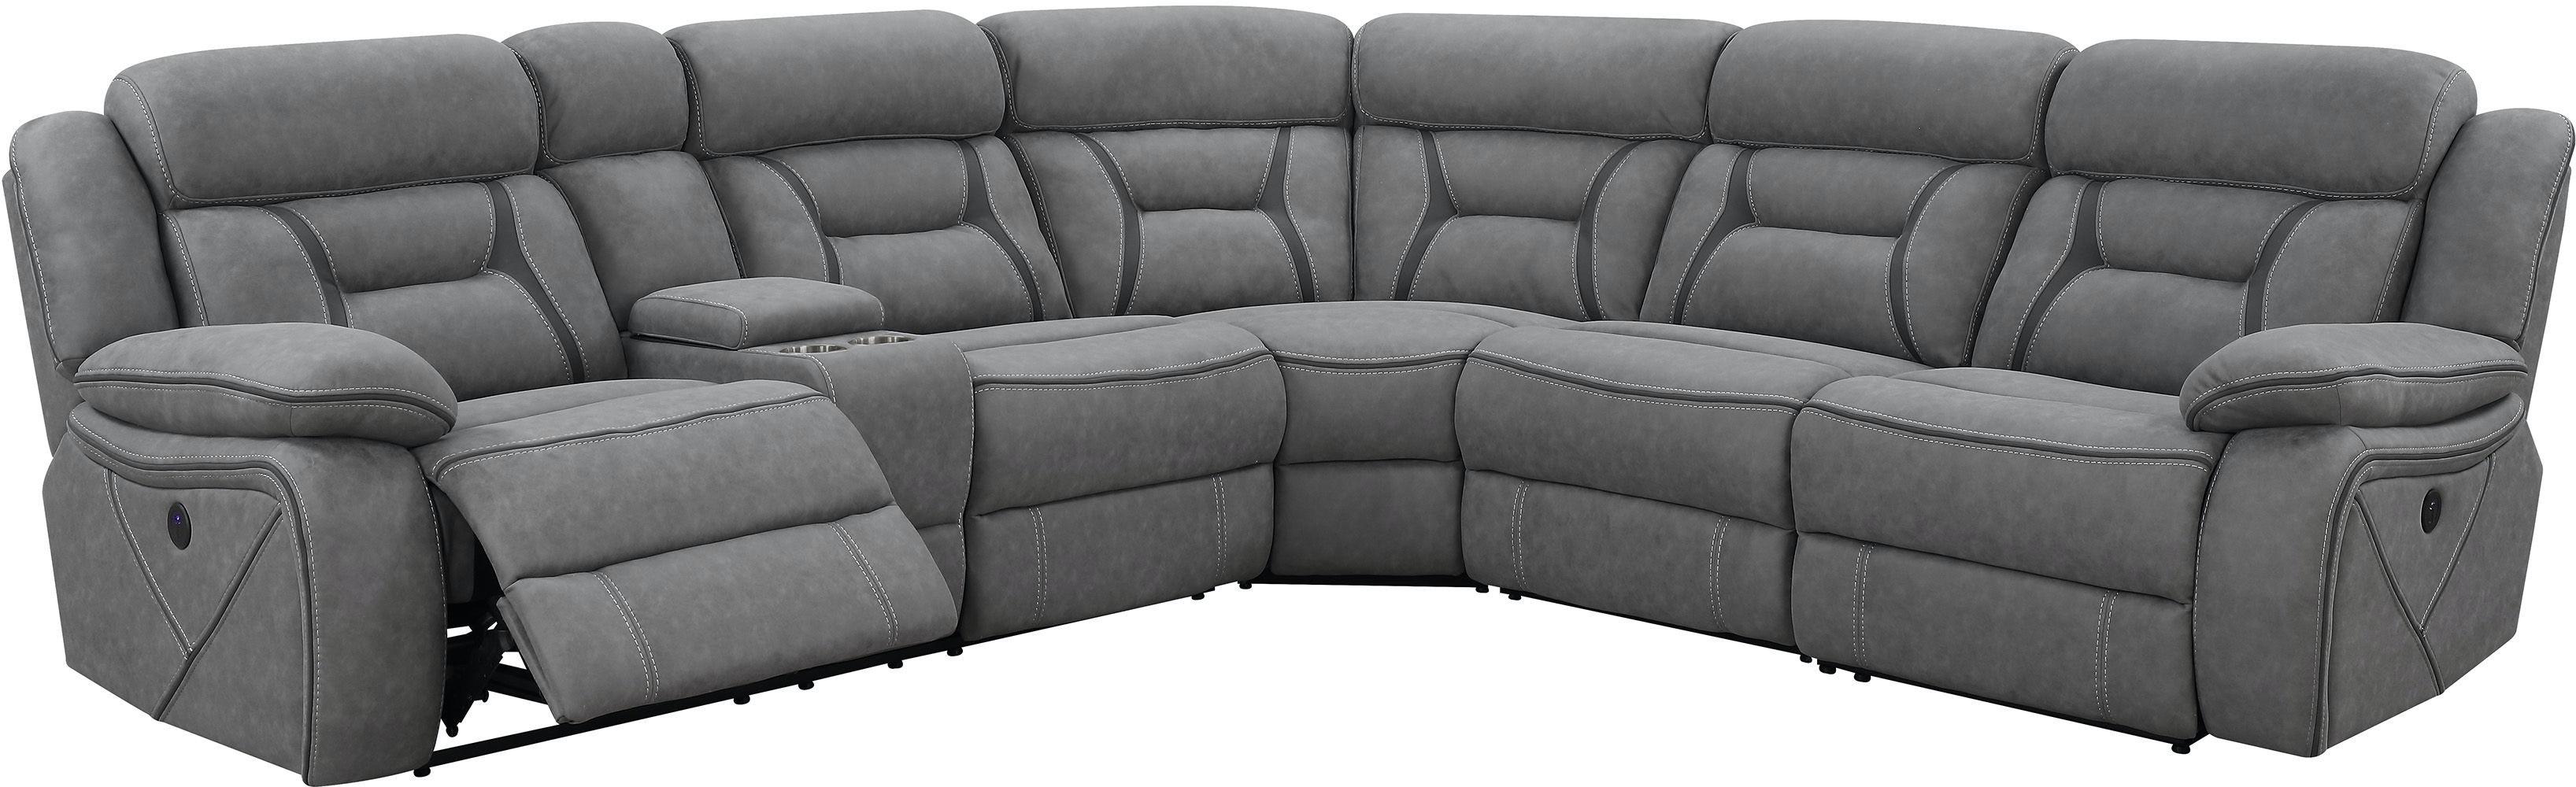 Contemporary Power Sectional 600370 Higgins 600370 in Gray 